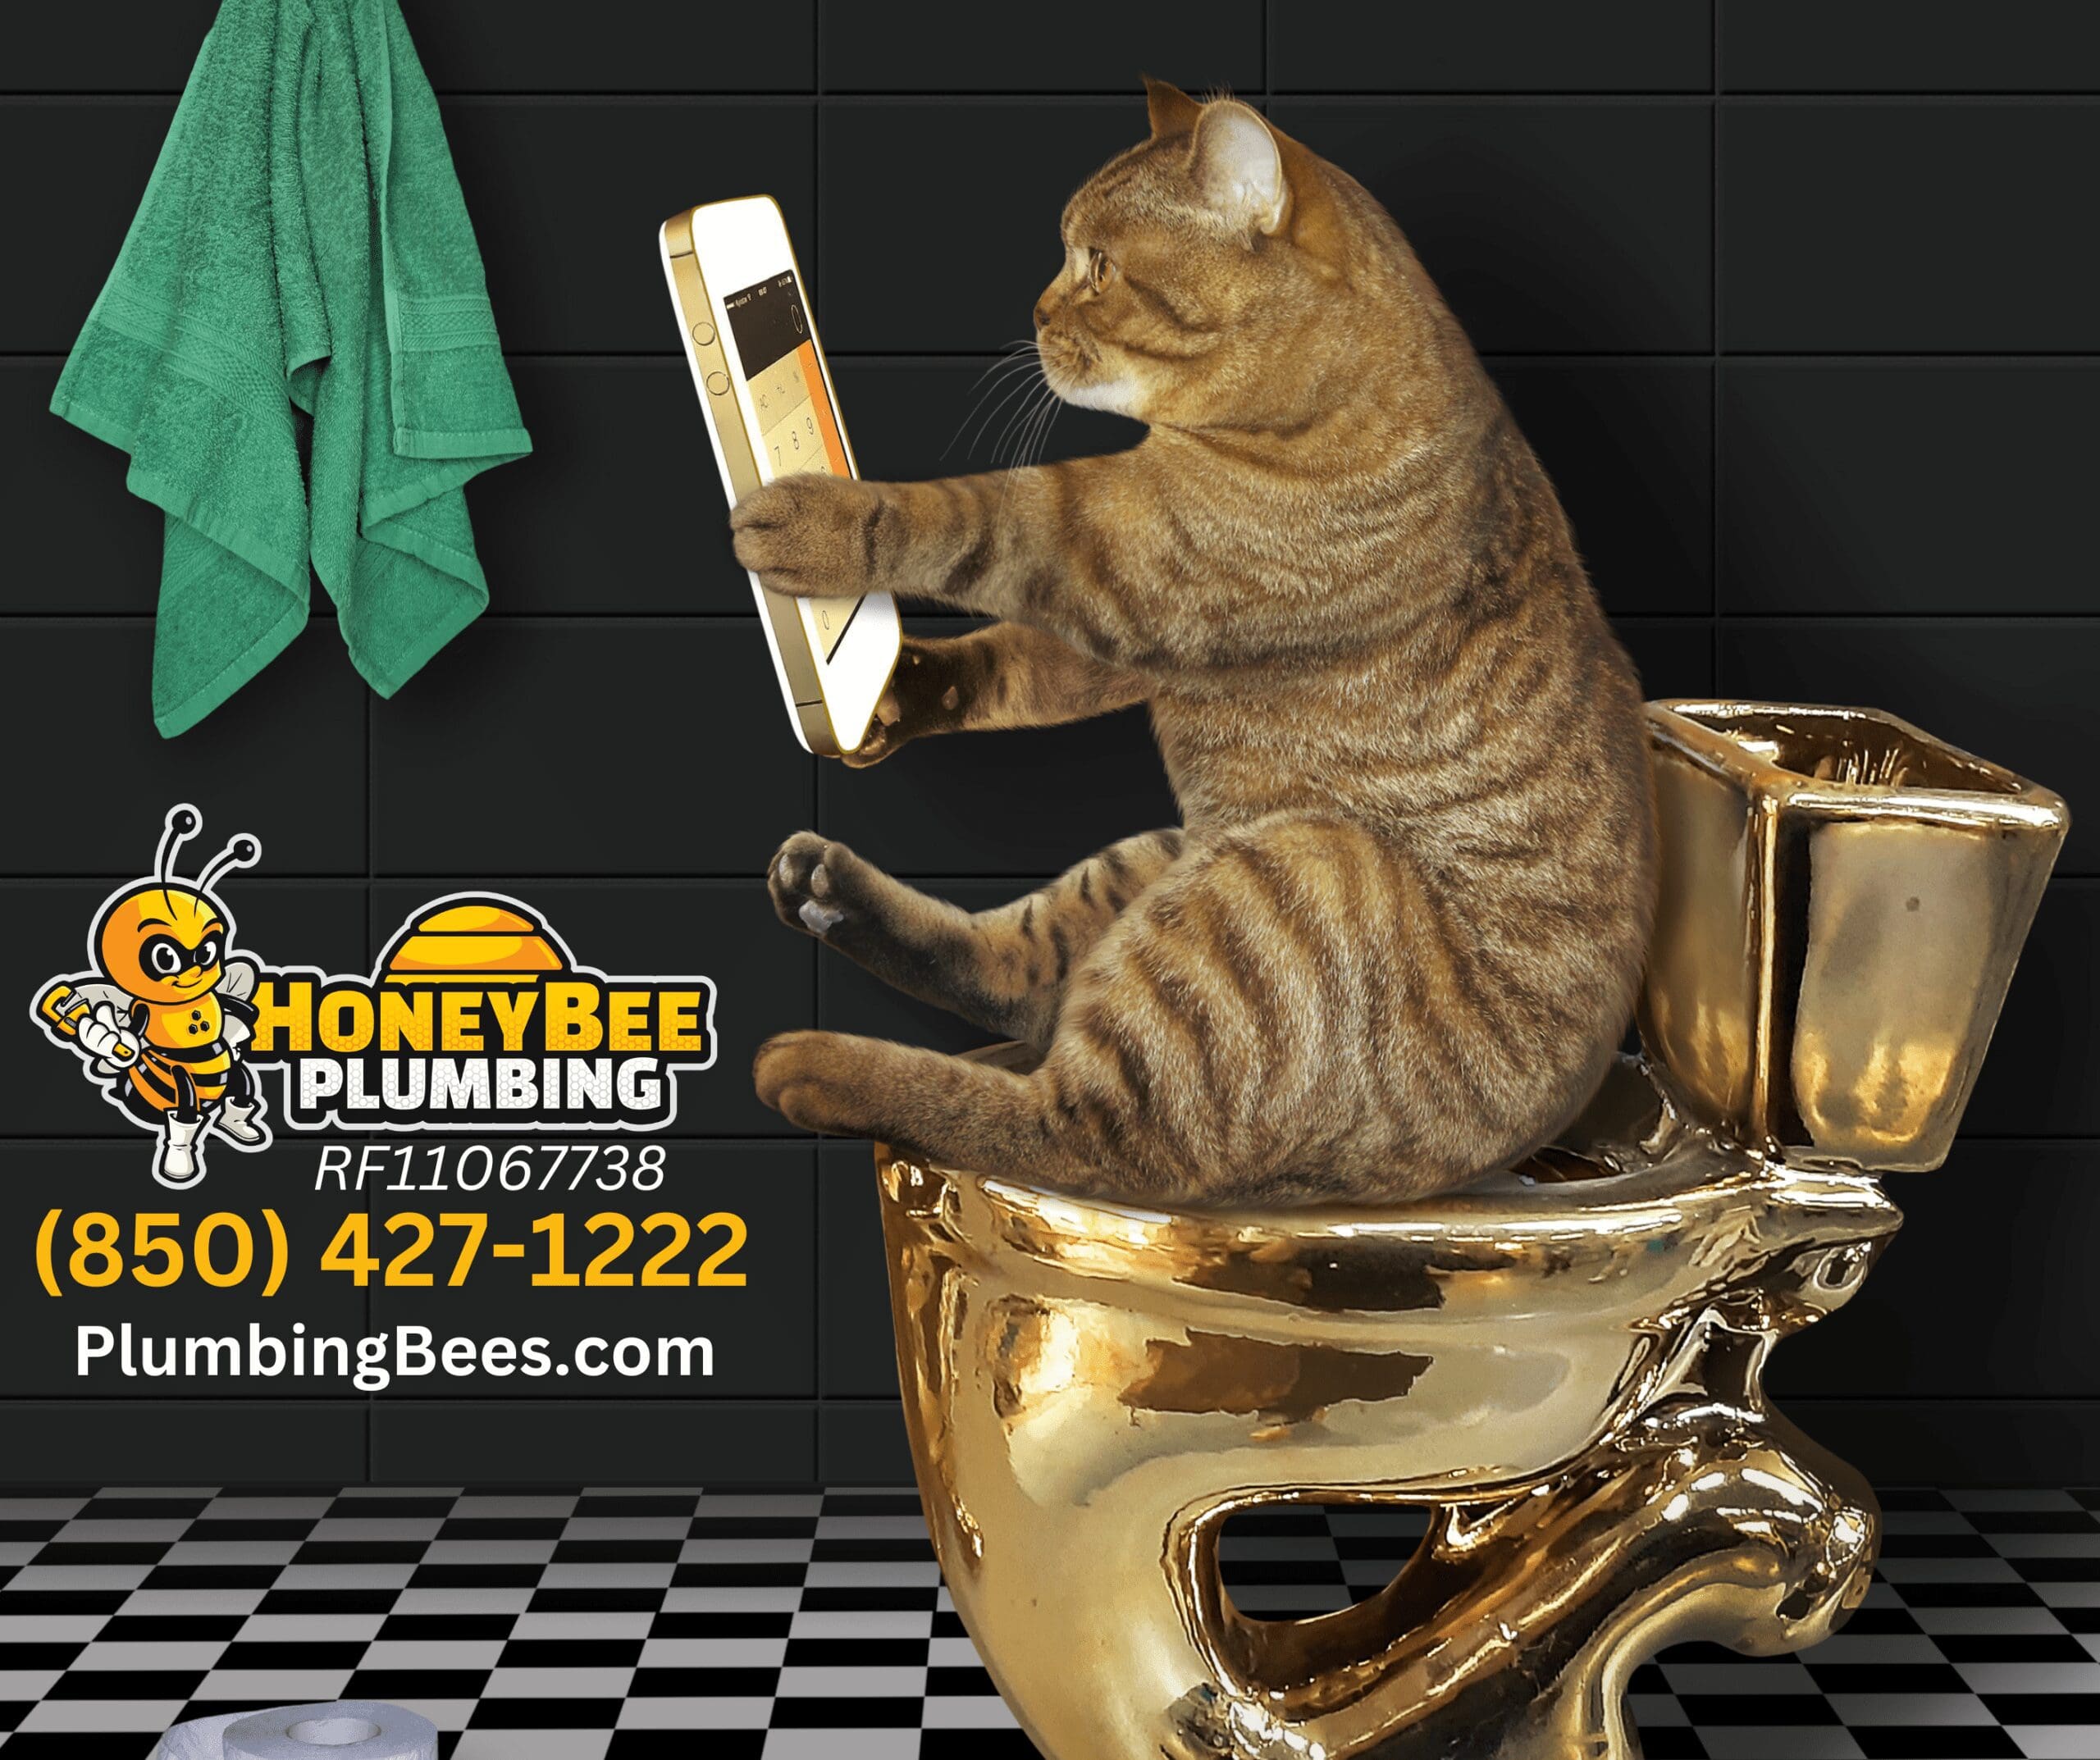 A cat amusingly seated on a golden toilet, playing with an iPhone, next to a cute Honey Bee Plumbing superhero mascot, with contact information.